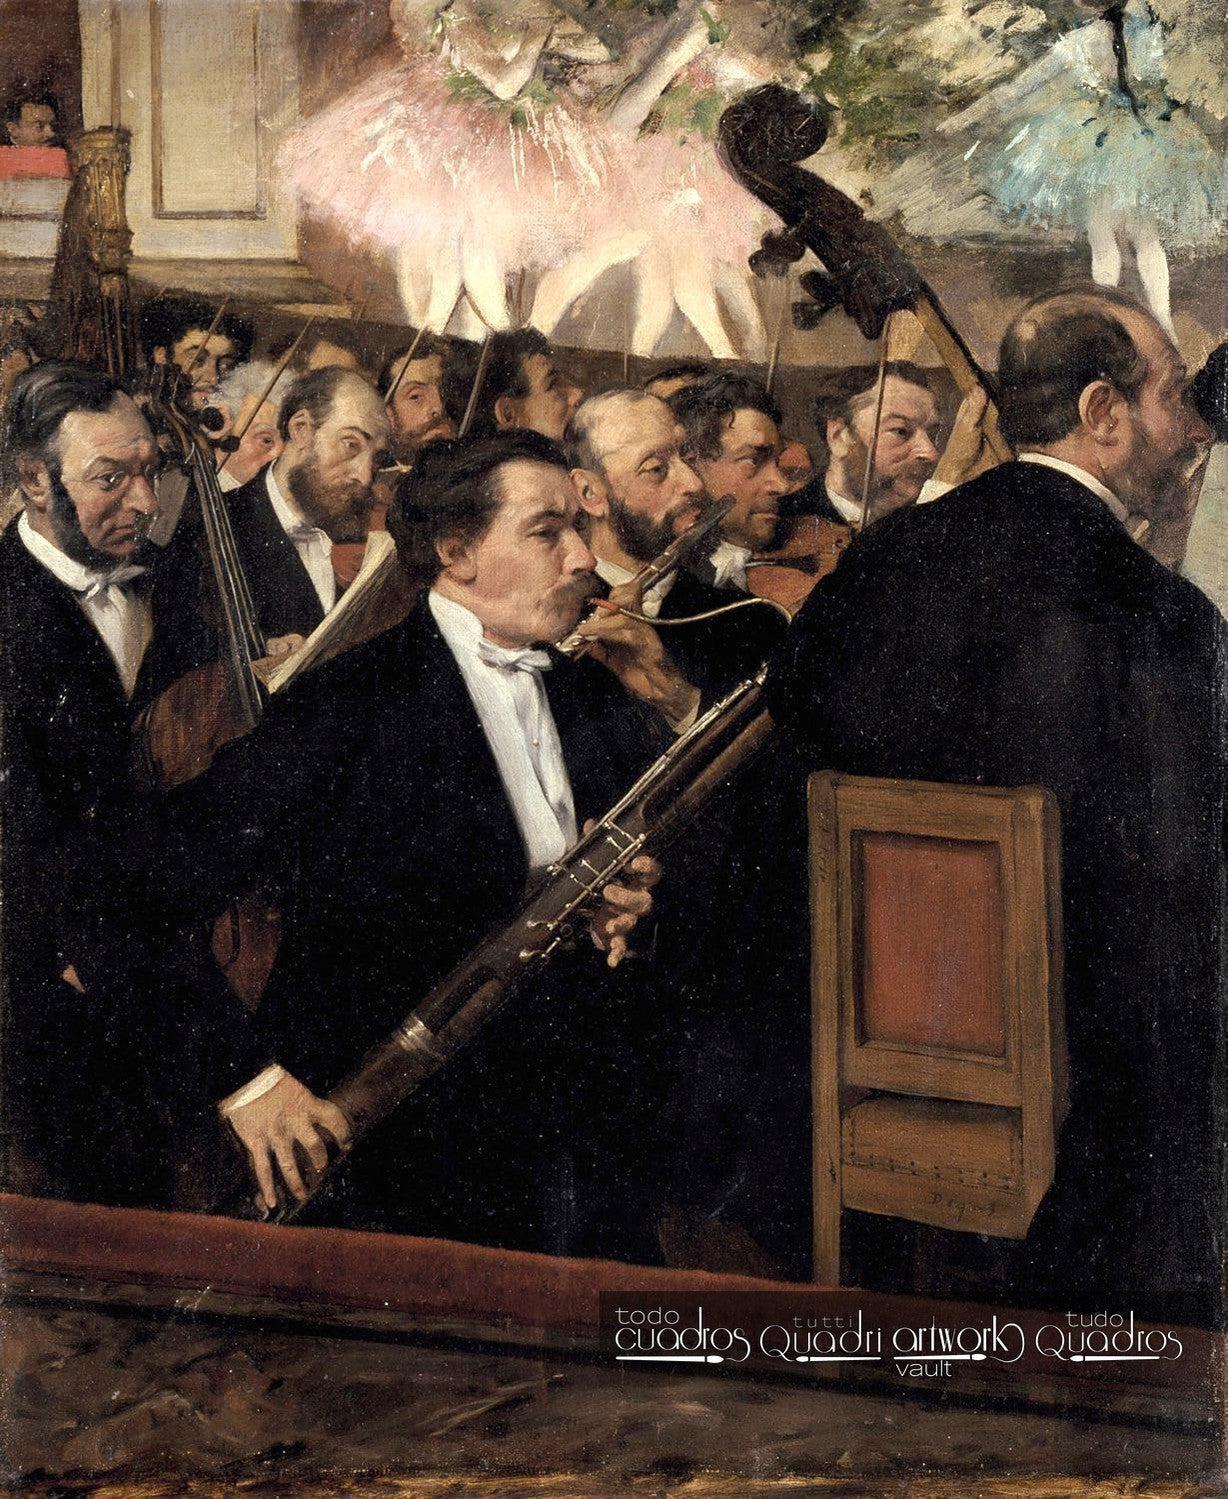 The Orchestra at the Opera, Degas